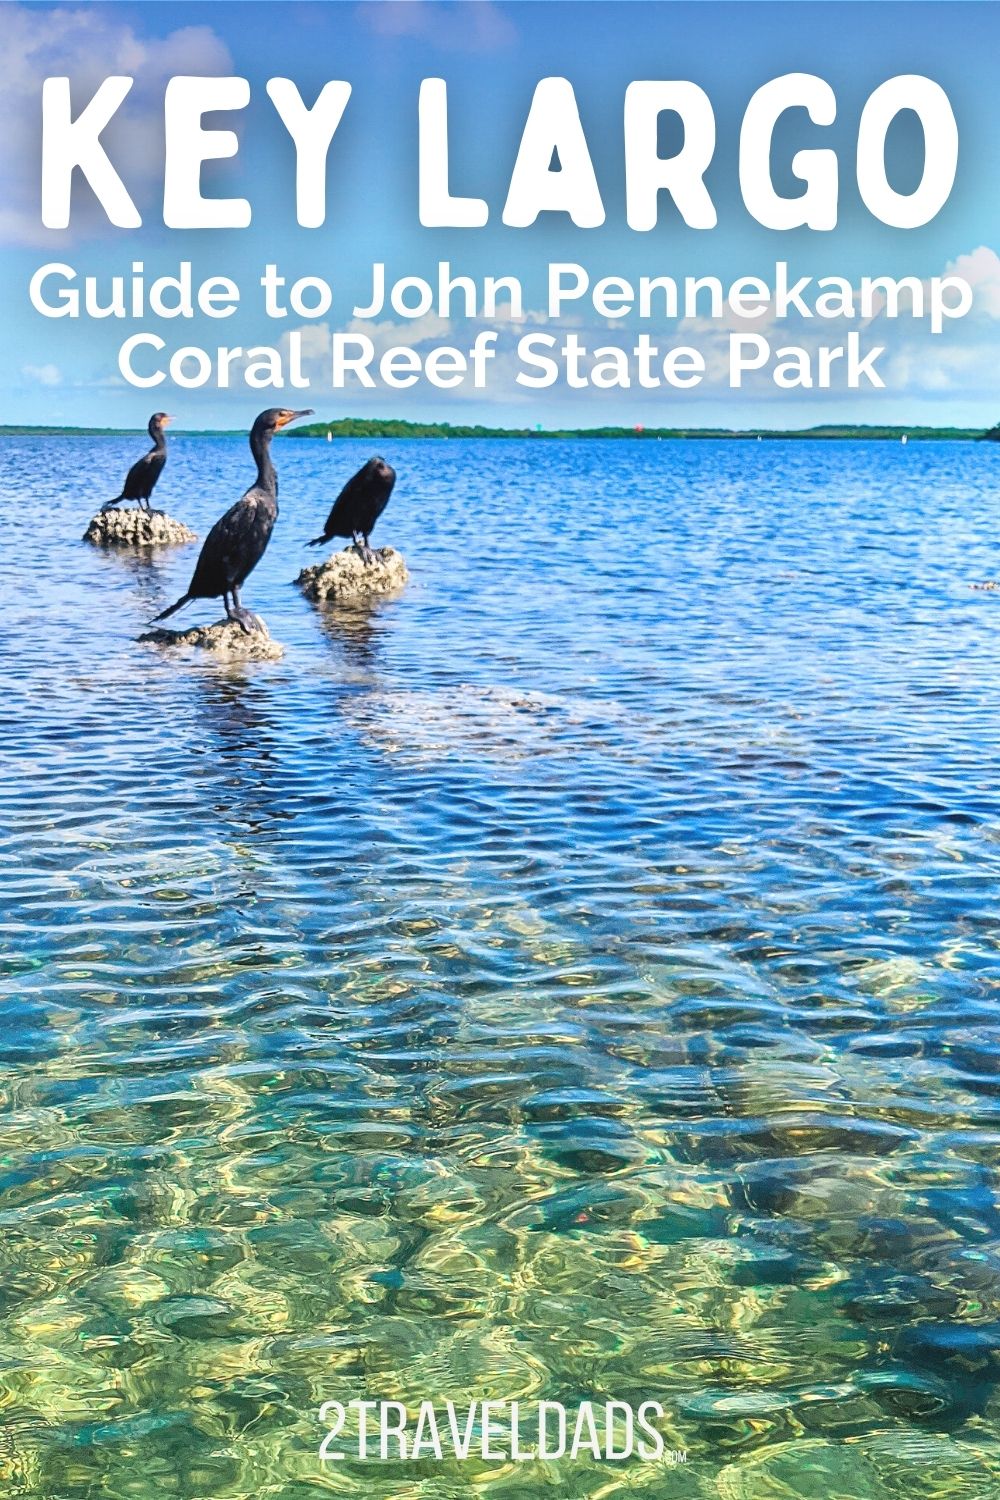 John Pennekamp Coral Reef State Park is located in Key Largo, in the upper Florida Keys. If you are looking for a great place for water activities this is the perfect spot!